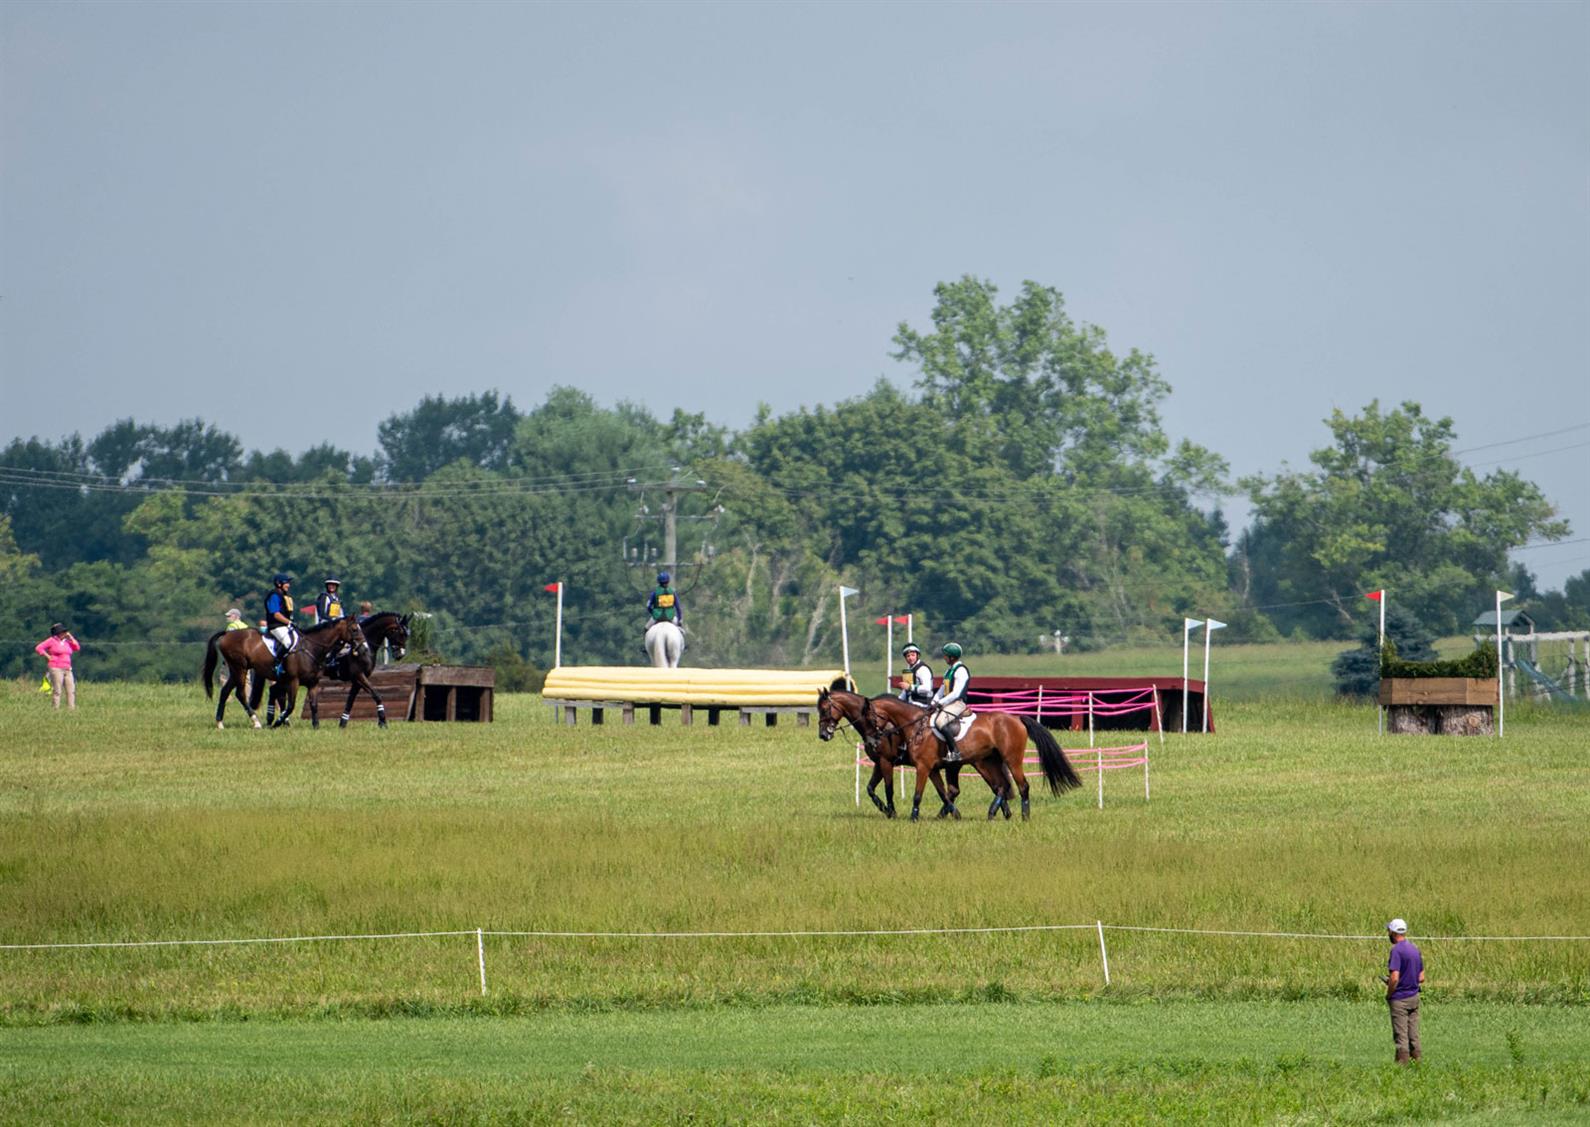 Scene from the CCI3* at Fair Hill, August 2020